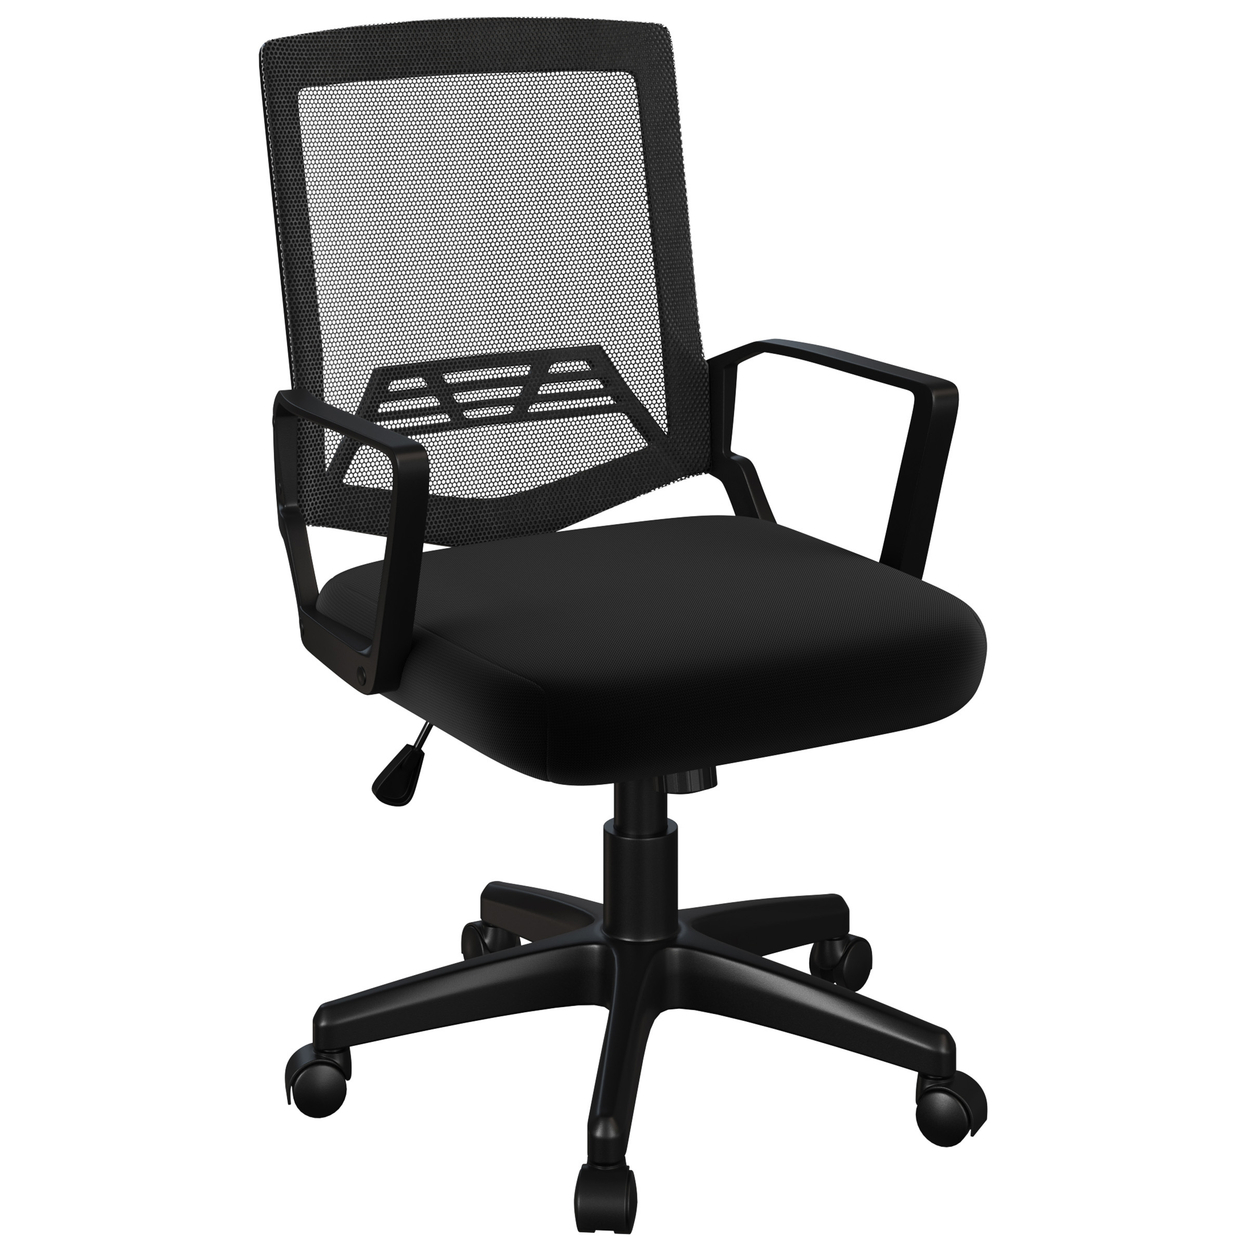 Office Chair Adjustable Height Computer Chair With Wheels, Square Tilting Mesh Back